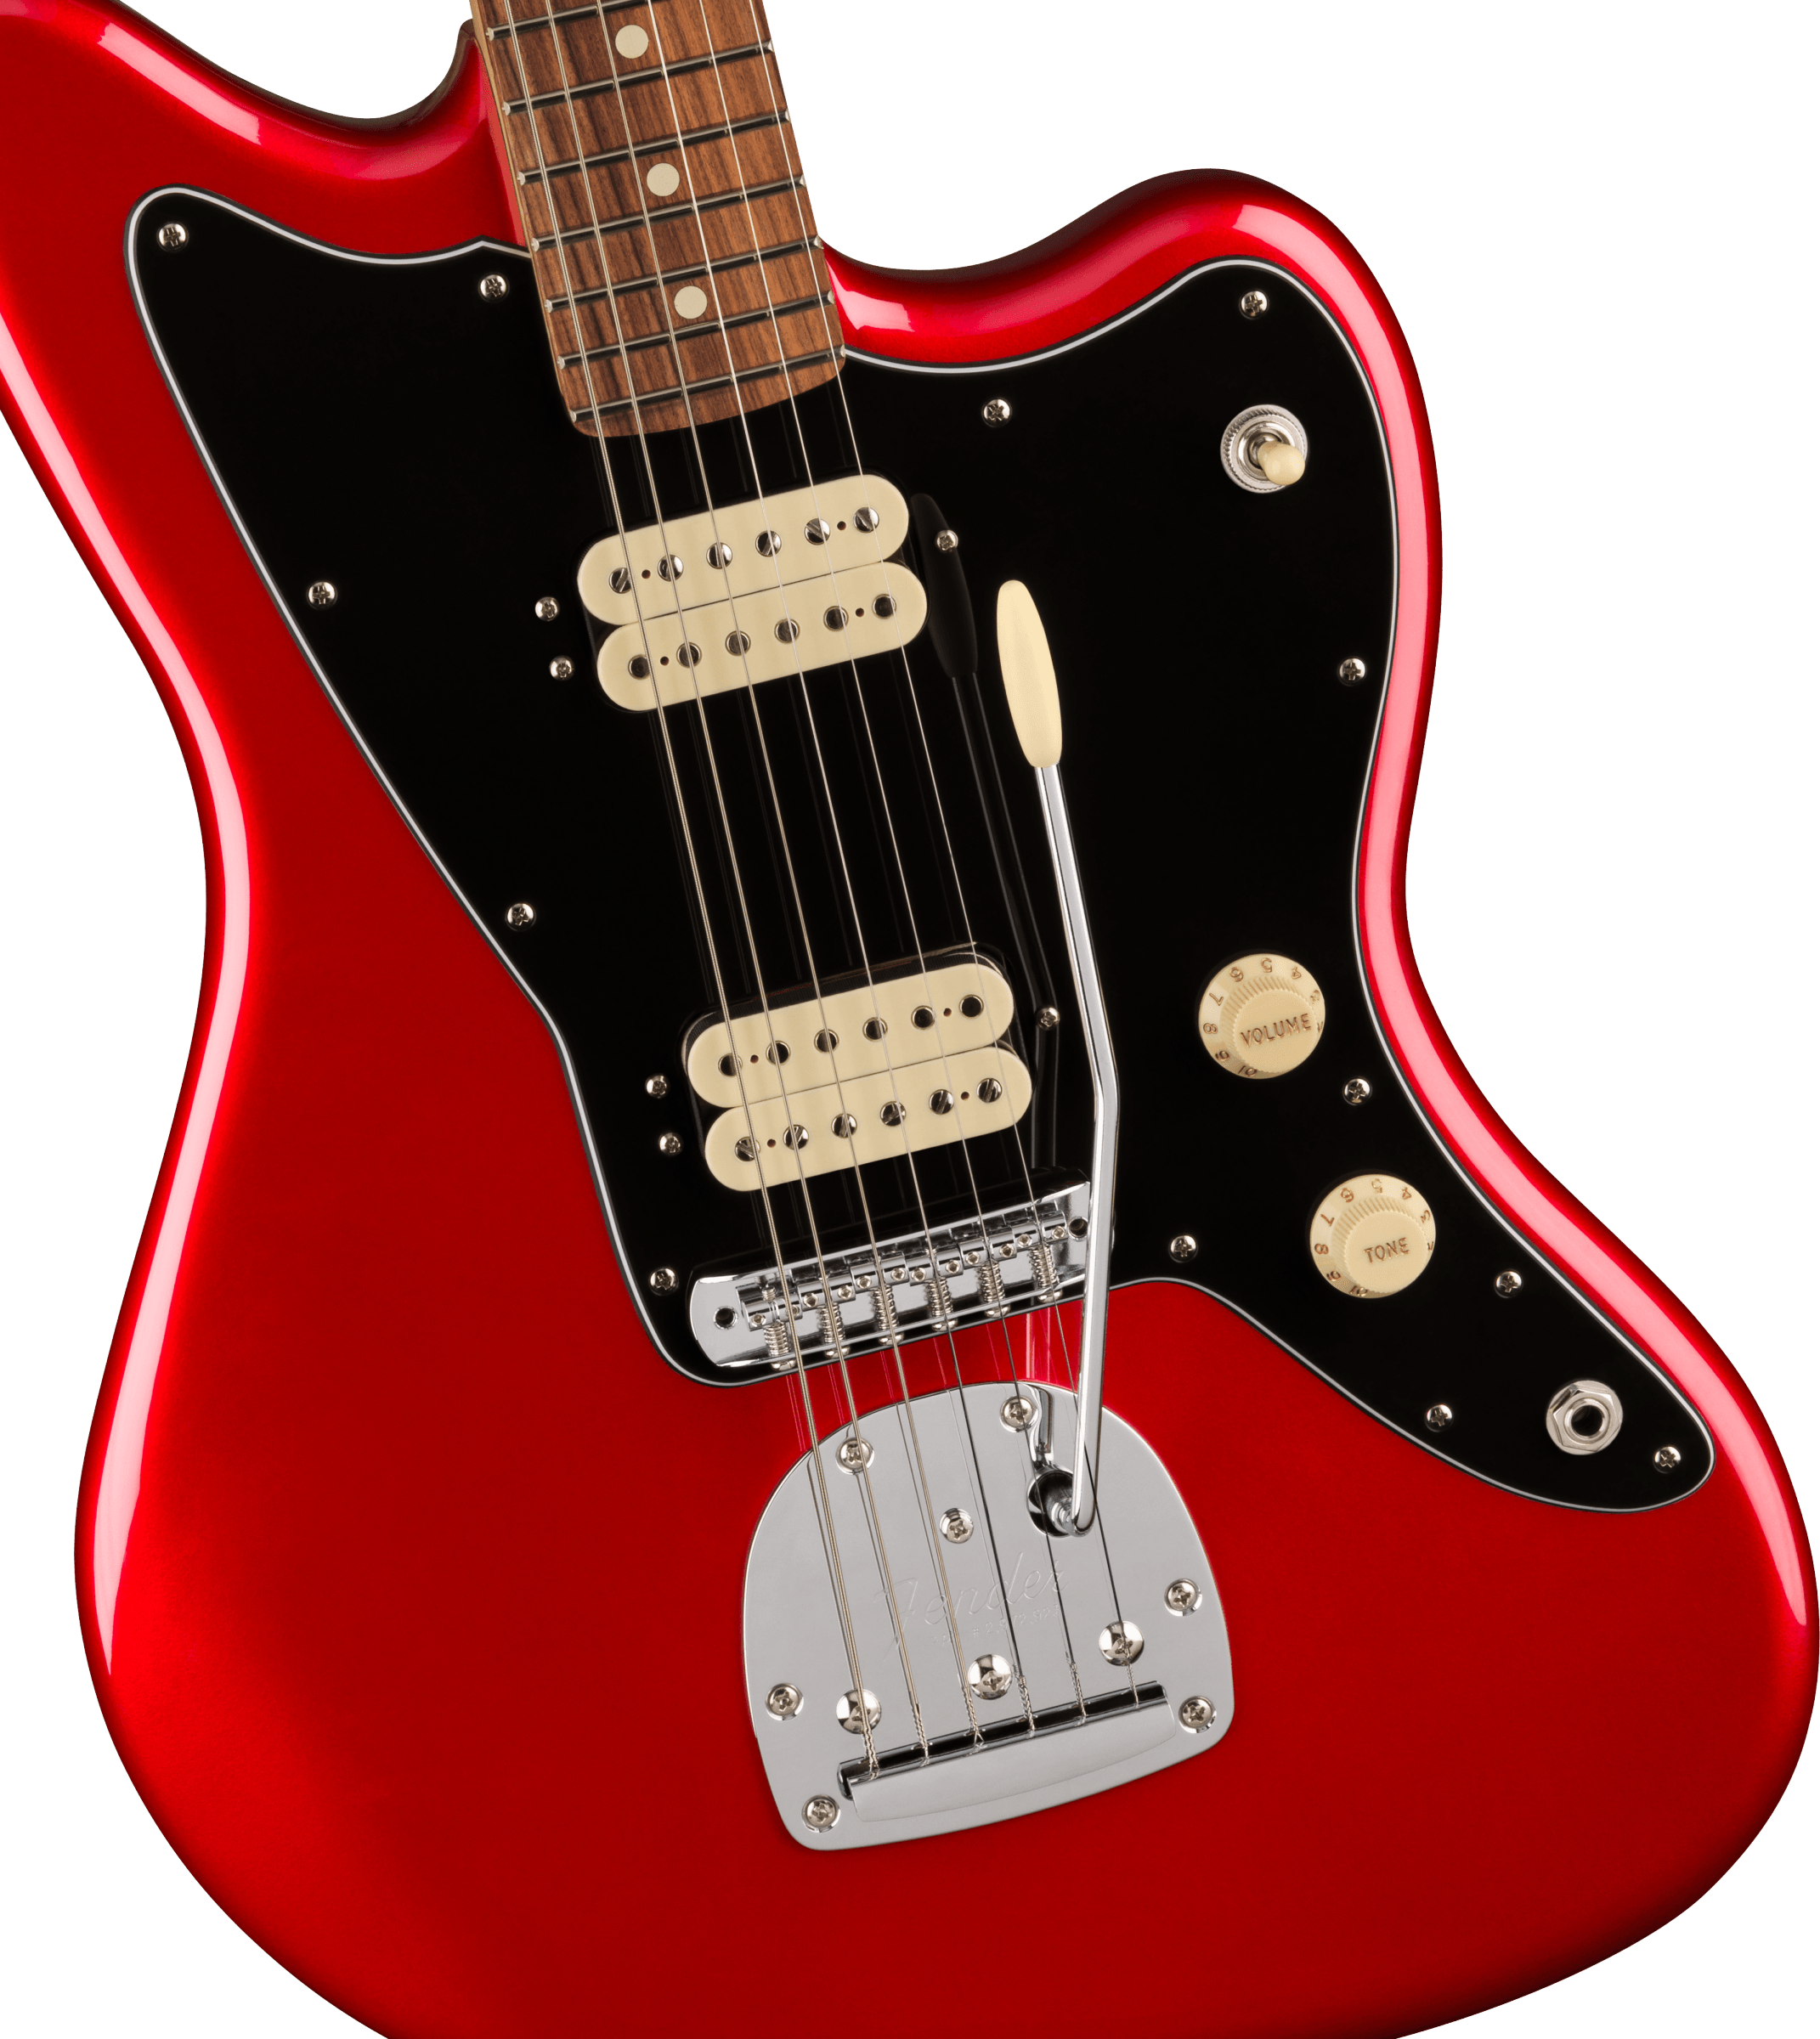 Fender Jazzmaster Player Hh Mex 2023 Trem 2h Pf - Candy Apple Red - Retro rock electric guitar - Variation 2